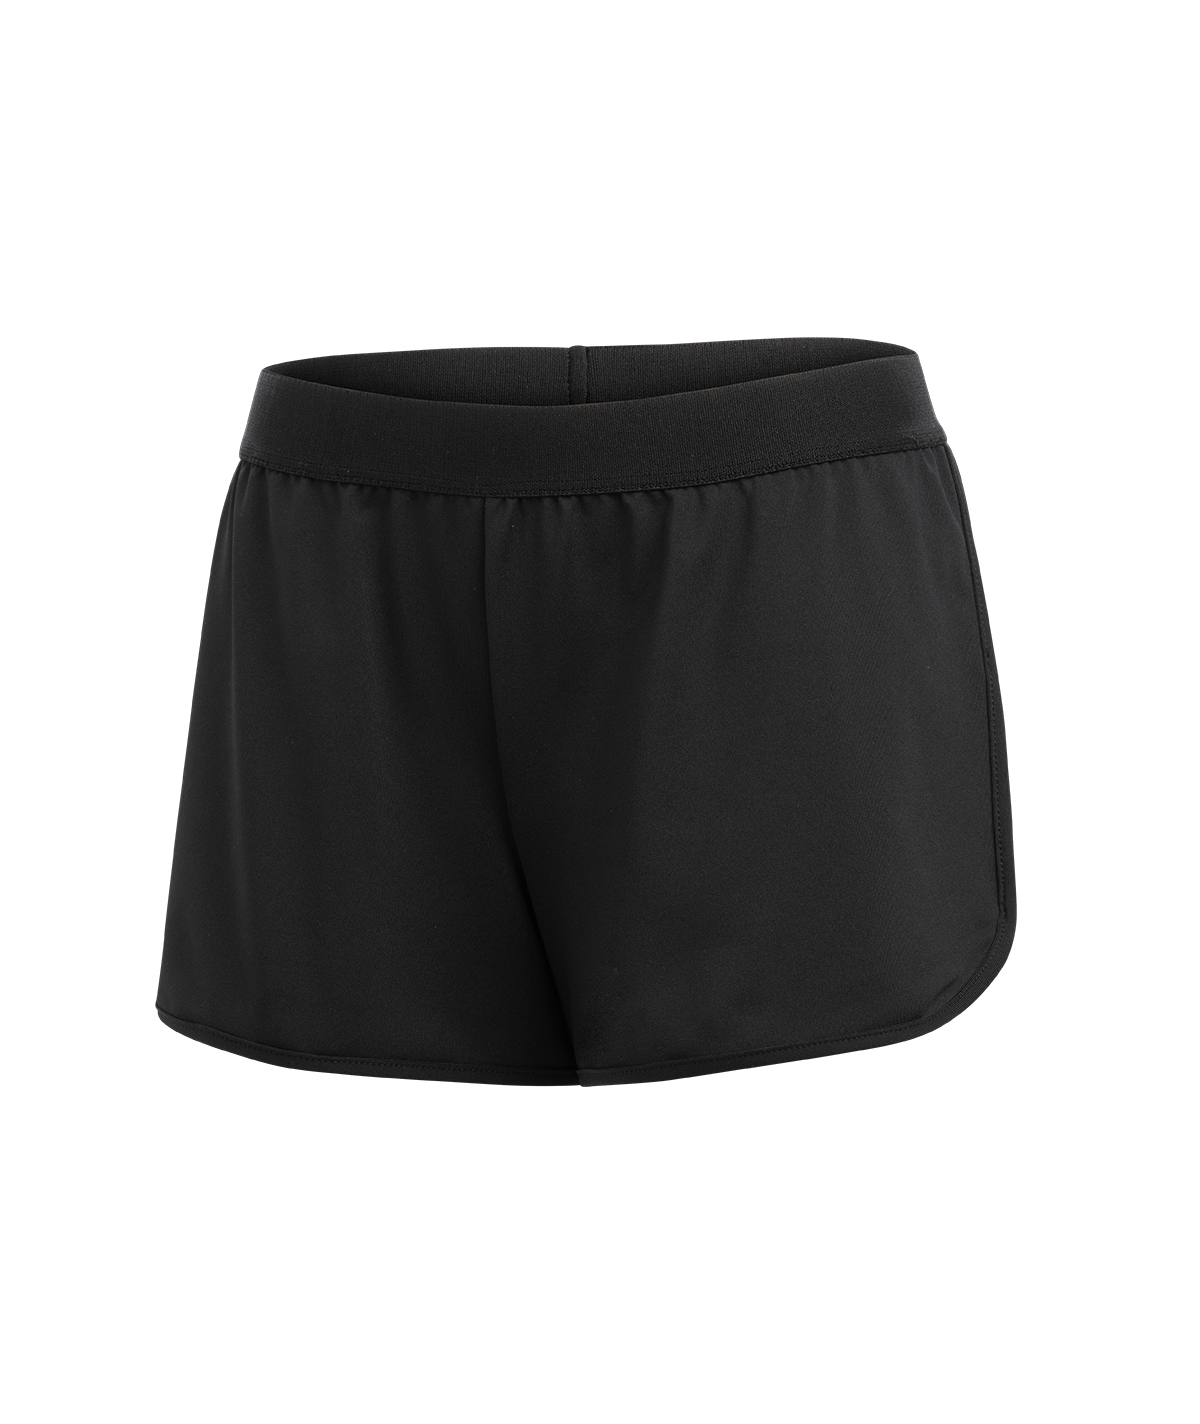 GK All Star Black-Banded Relaxed Short - Practice Wear | Omni Cheer